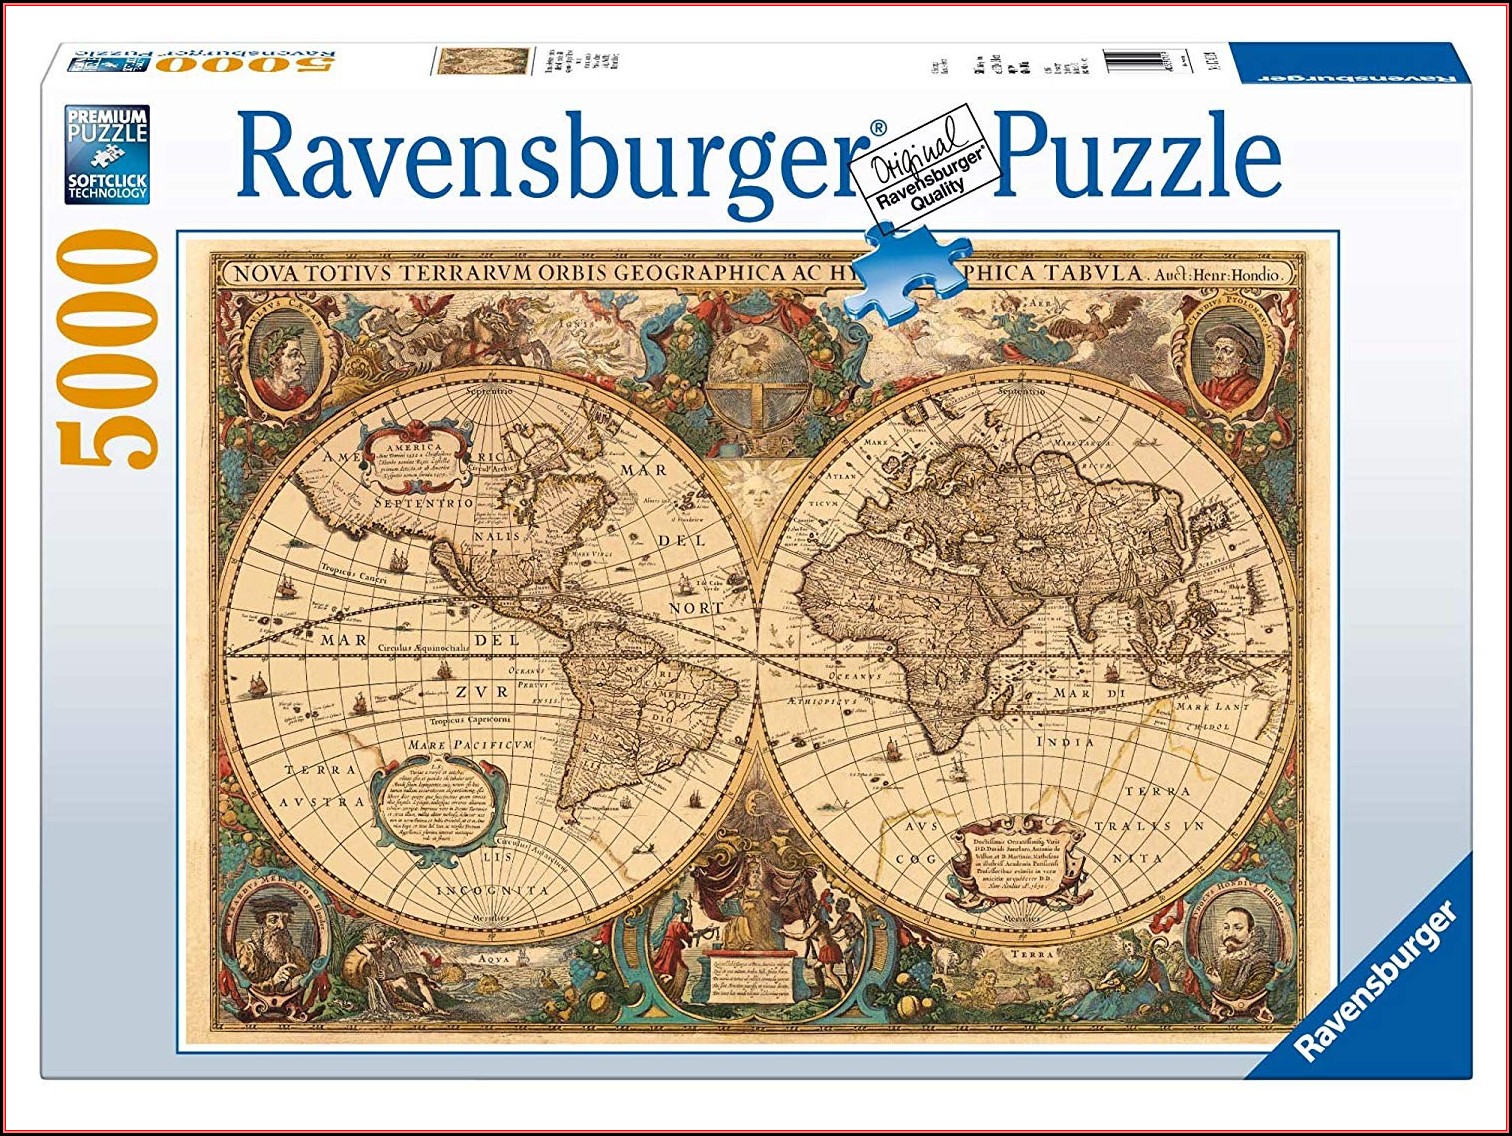 Antique World Map Jigsaw Puzzle